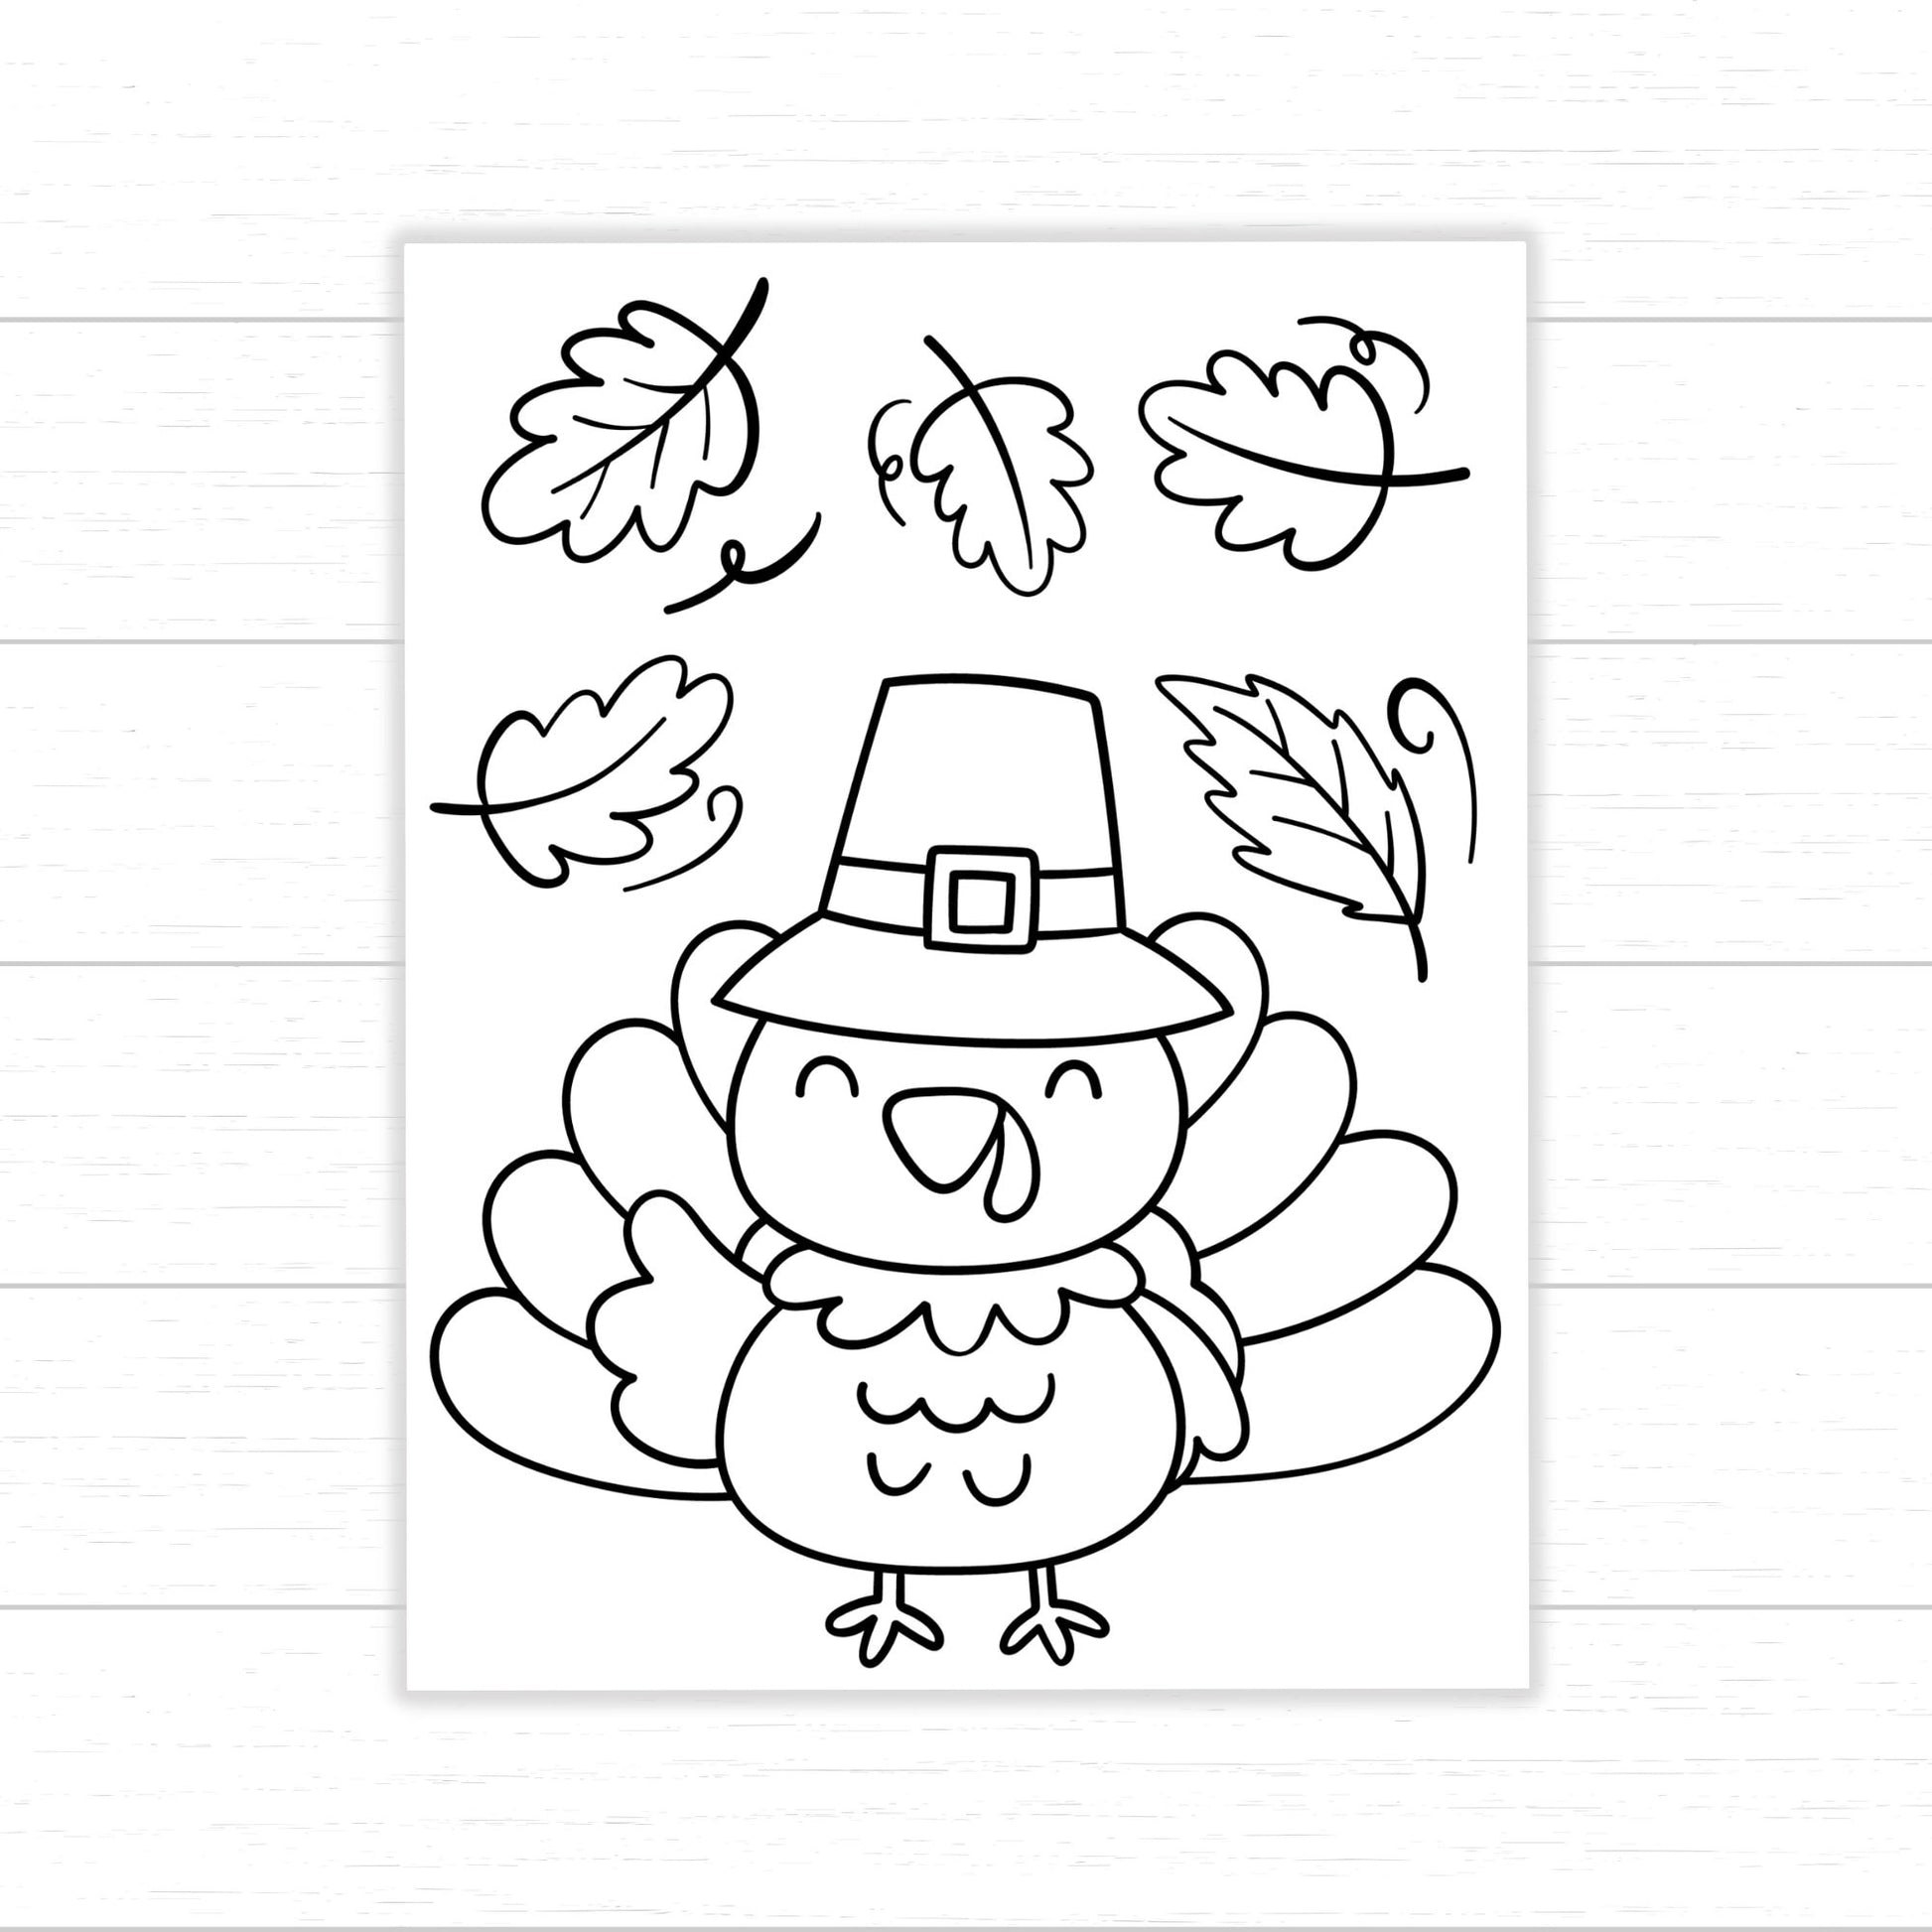 Cute Turkey Coloring Pages, Printable Turkey Coloring Pages for Kids, Printable Thanksgiving Coloring Pages, Turkey Coloring Book